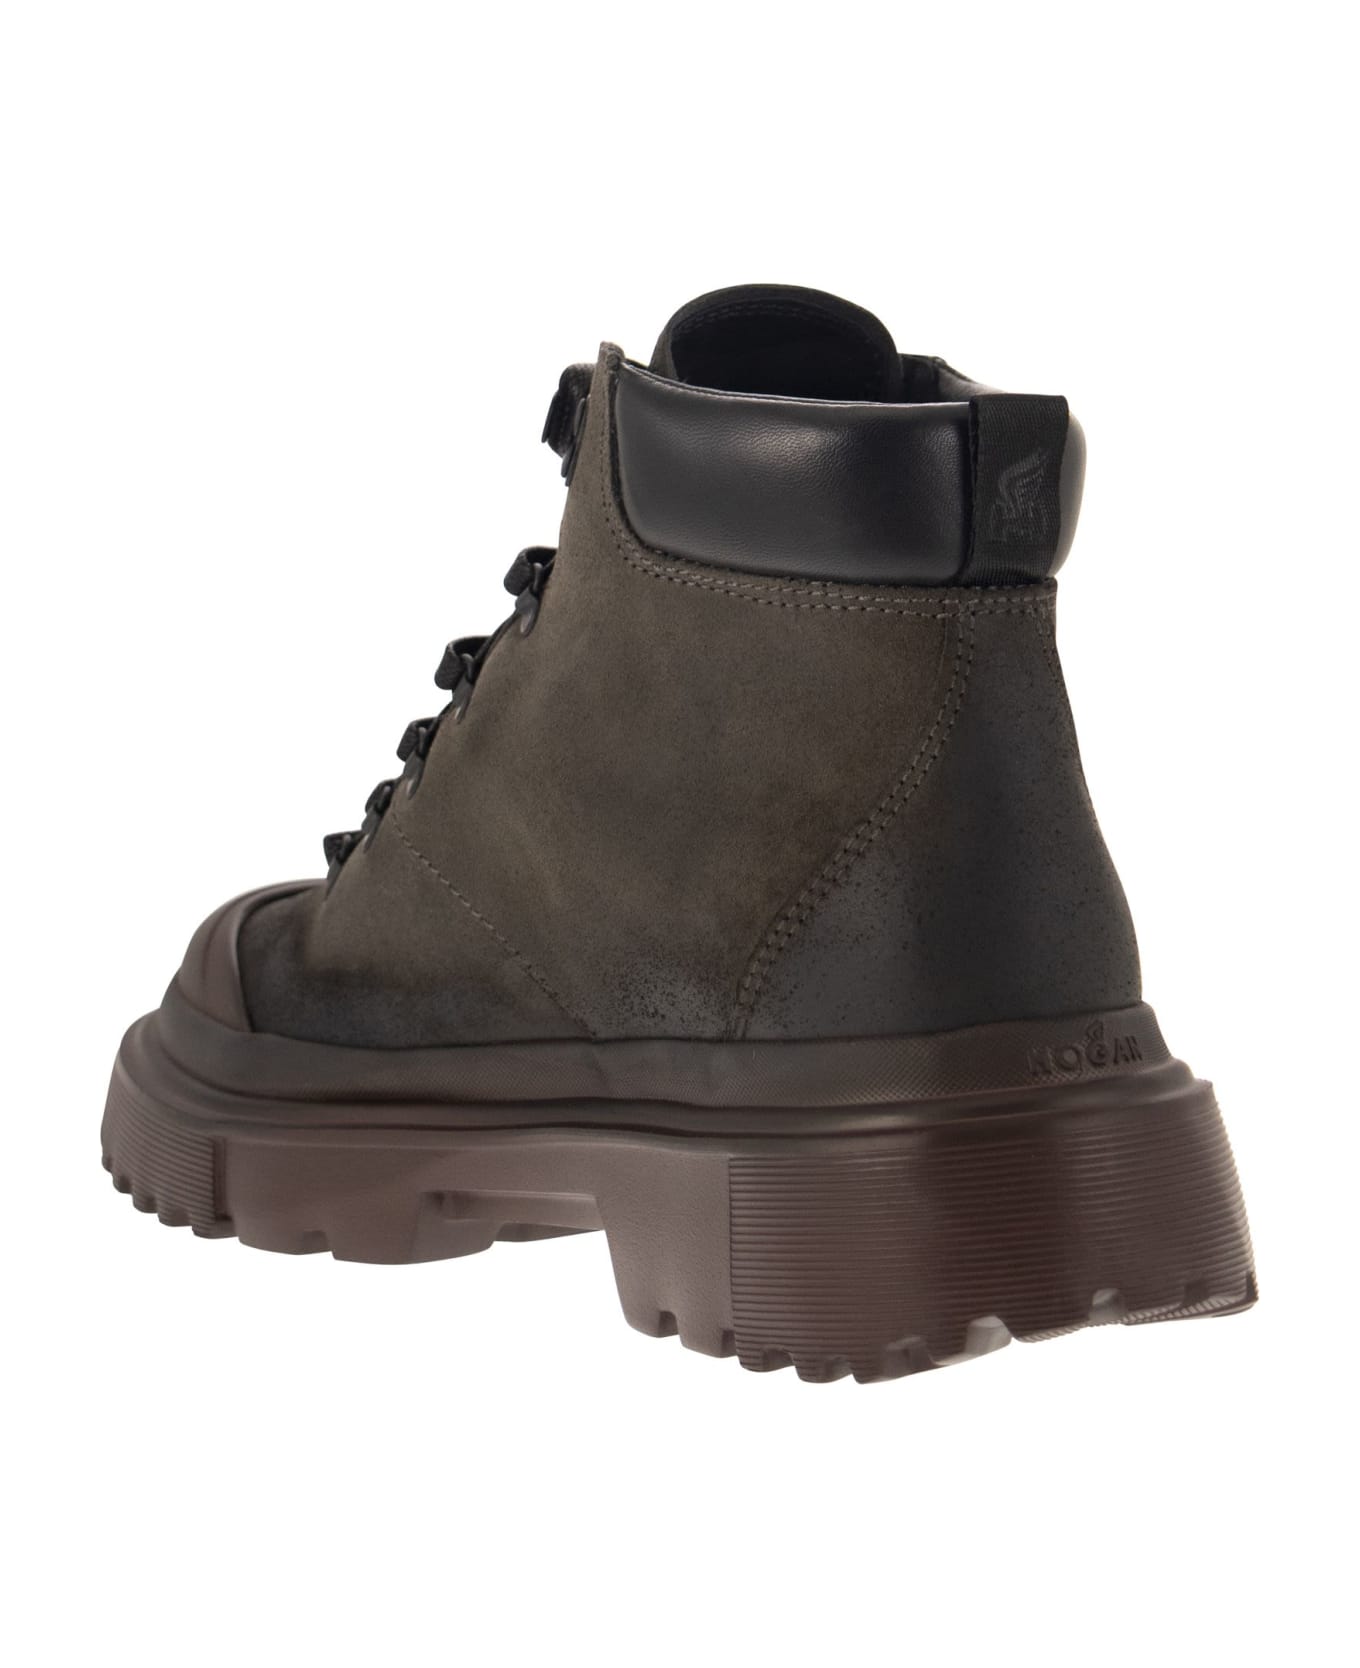 Hogan Greased Nubuck Leather Ankle Boot - Brown